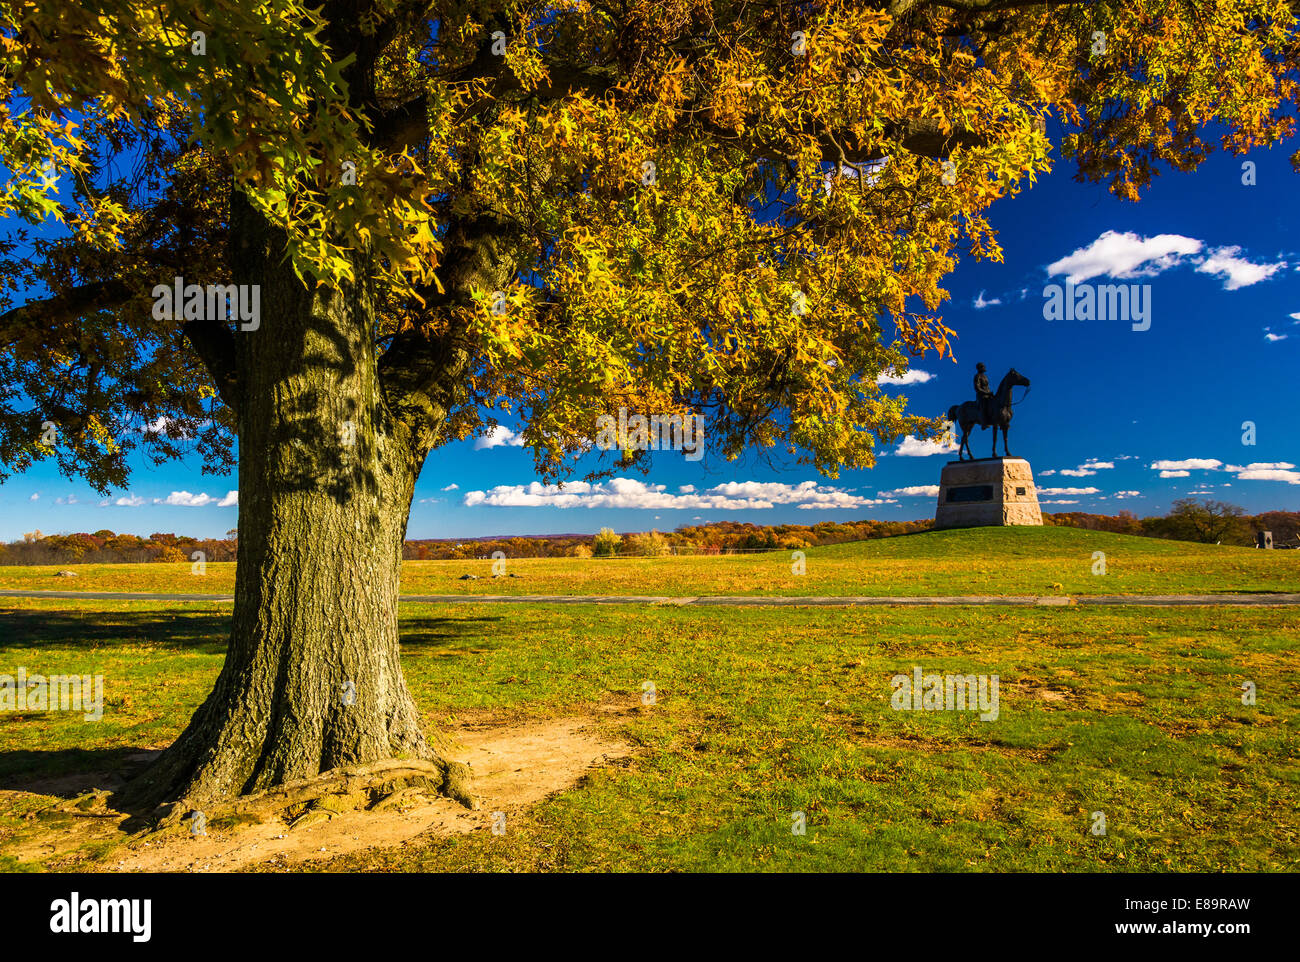 Tree and statue on a battlefield at Gettysburg, Pennsylvania. Stock Photo